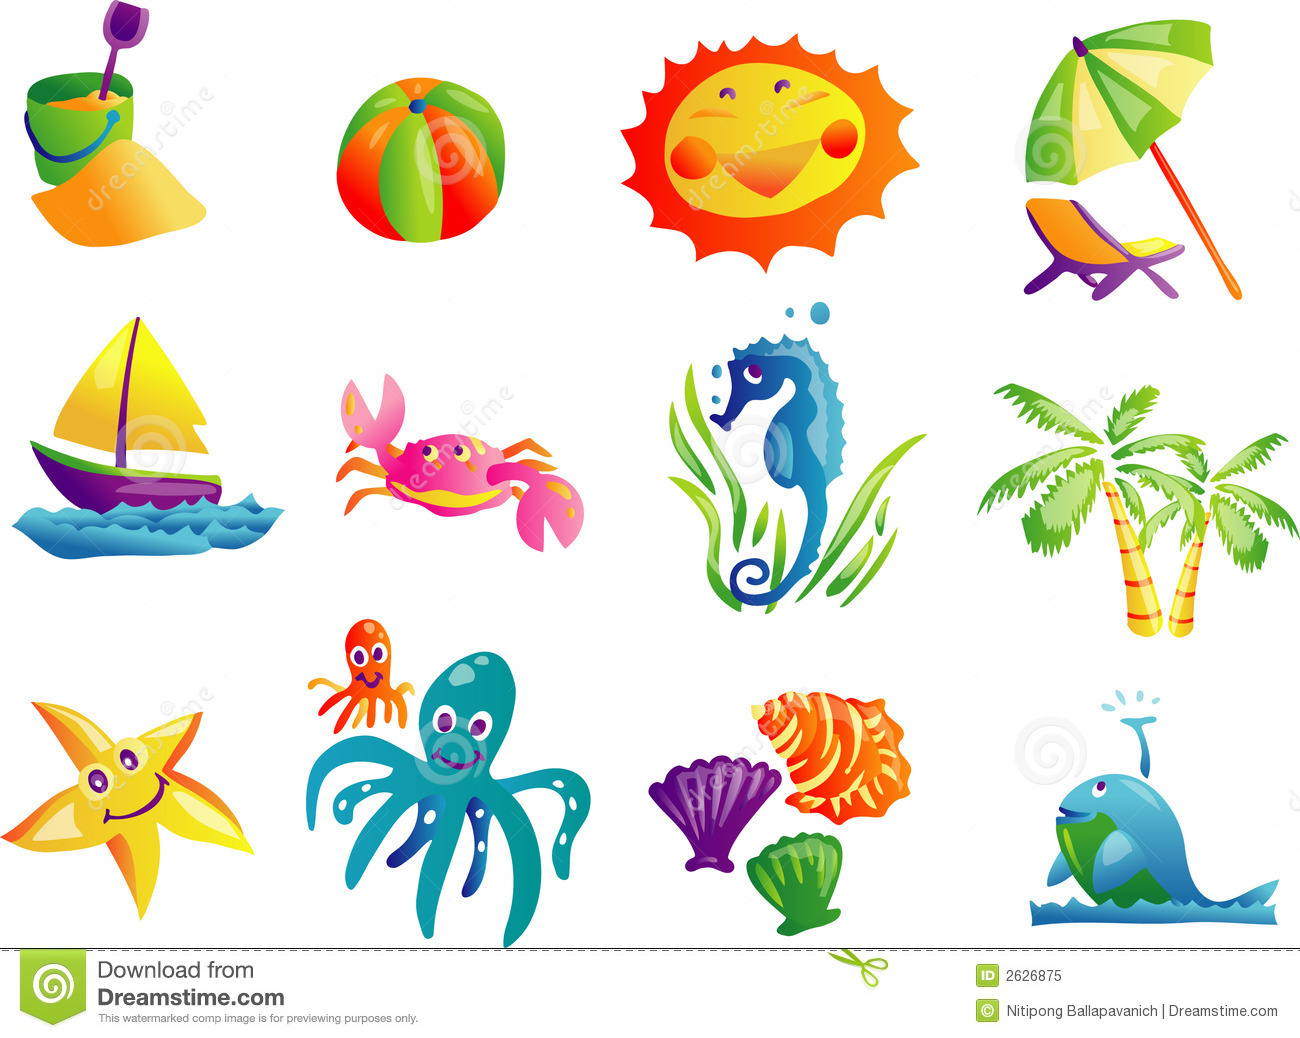 Free Summer Beach Cliparts, Download Free Clip Art, Free.